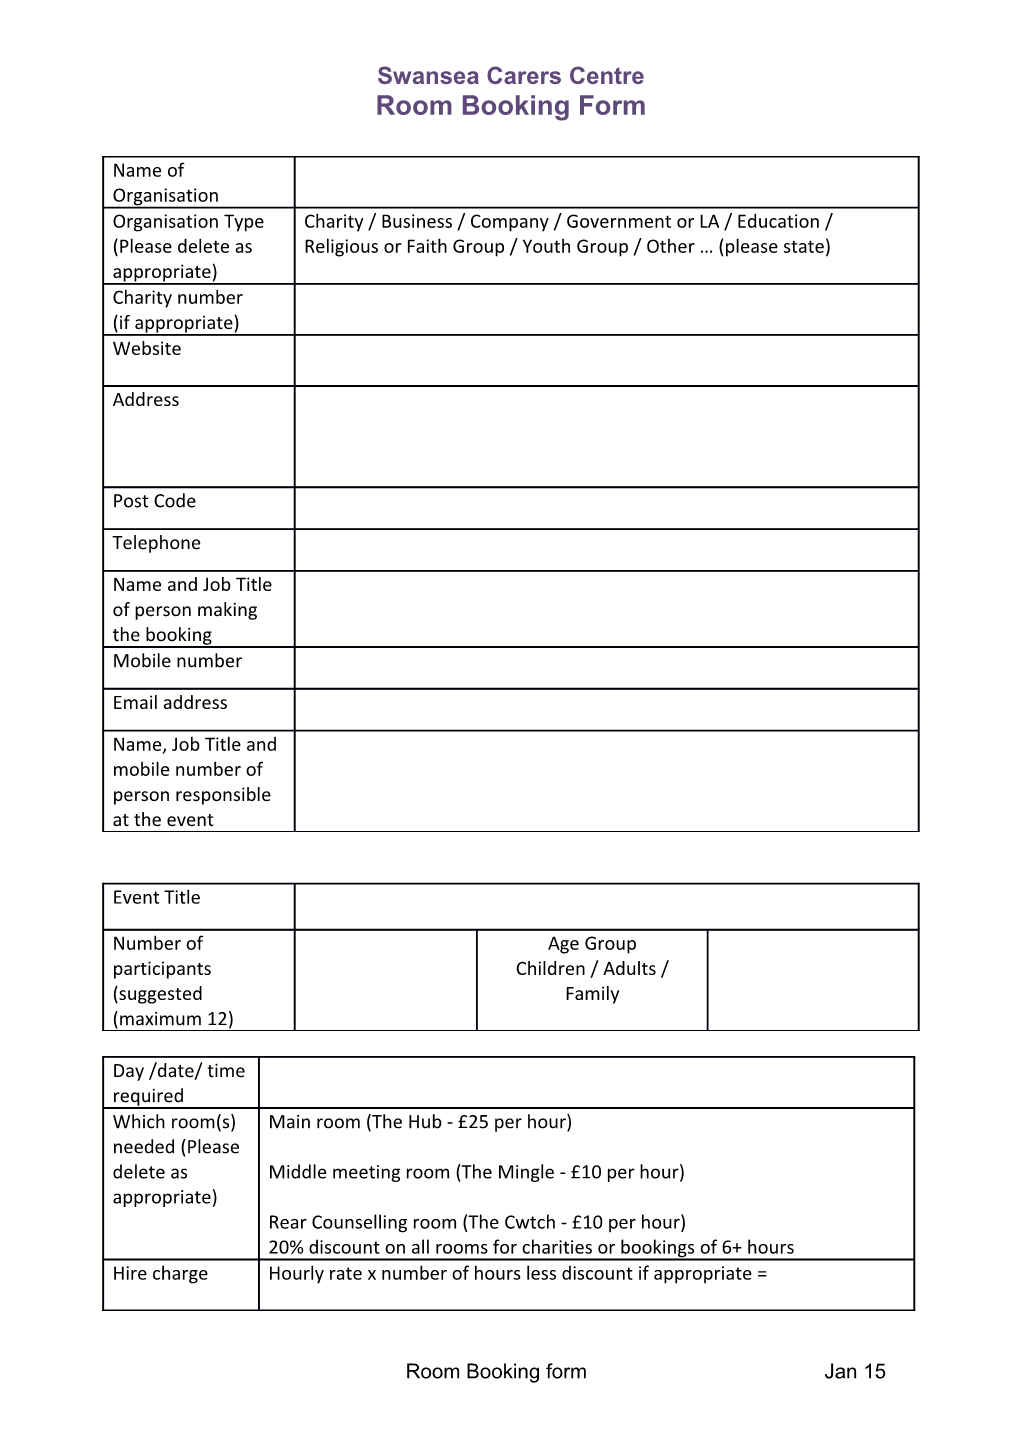 Room Booking Form